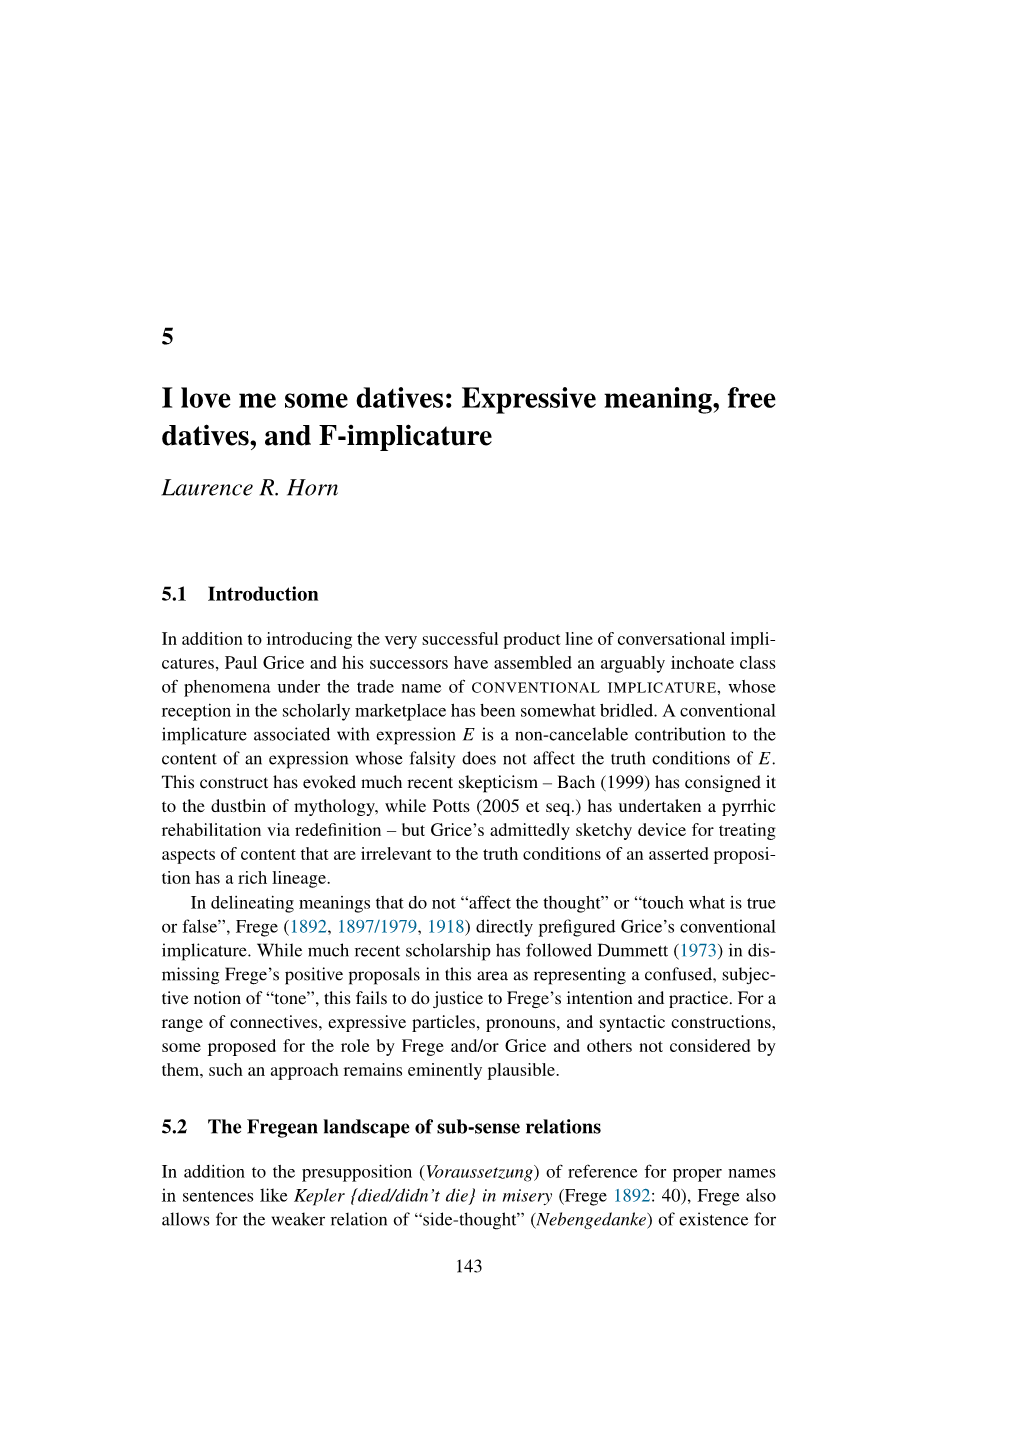 I Love Me Some Datives: Expressive Meaning, Free Datives, and F-Implicature Laurence R